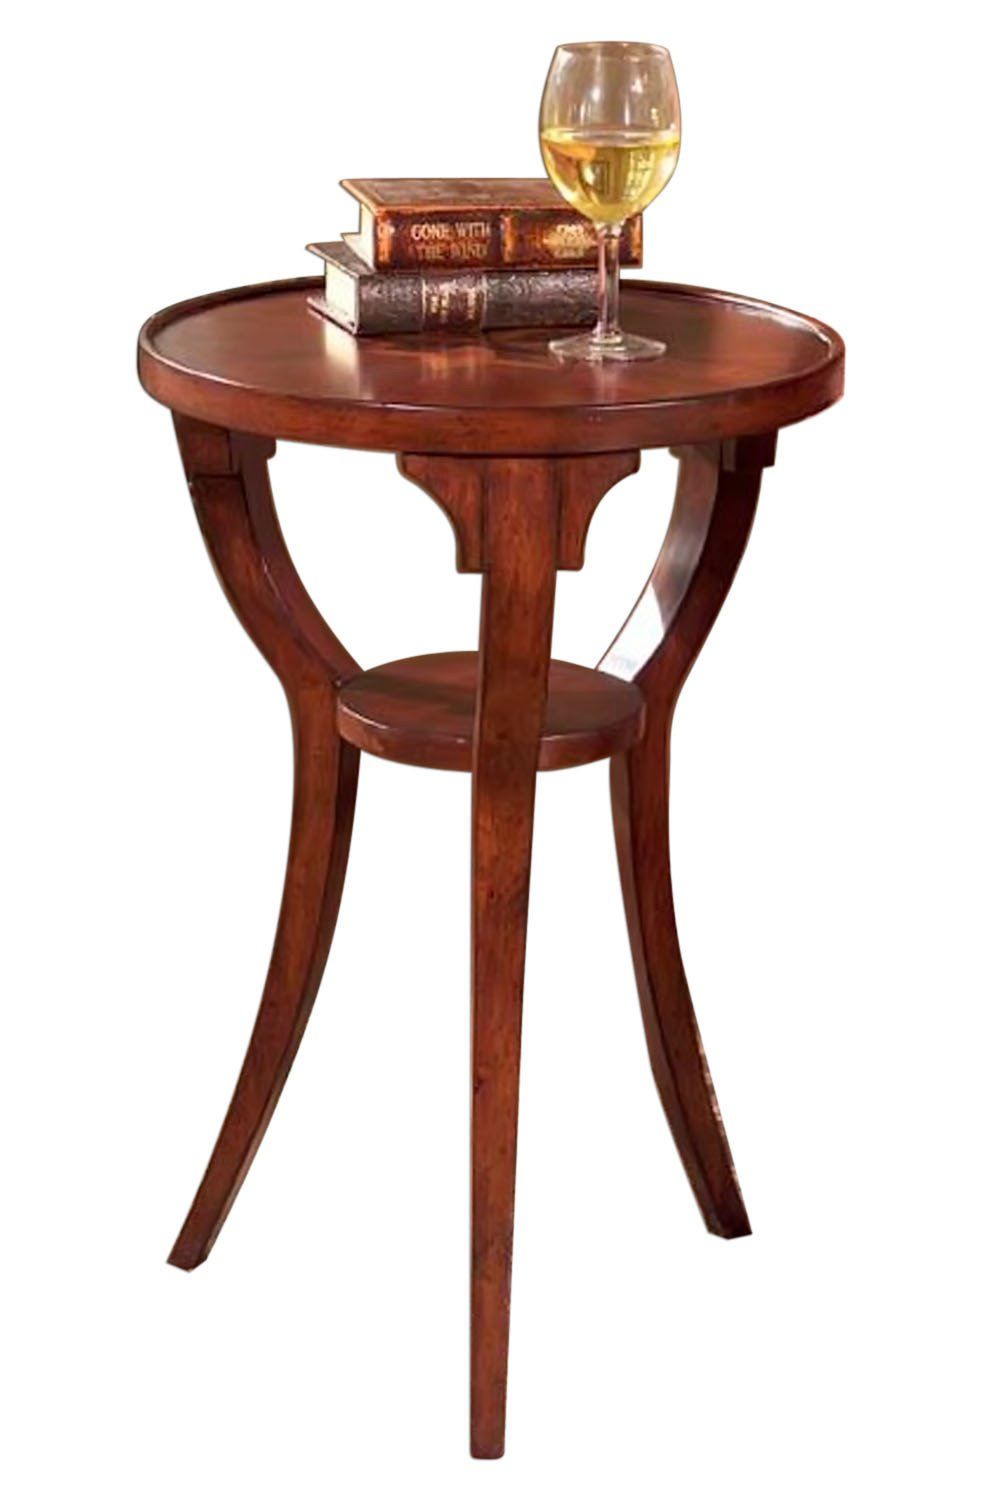 butler home decor round accent table finish type light plantation cherry short coffee wrought iron bistro set ikea cube boxes target buffet makeup wicker couch occasional tables